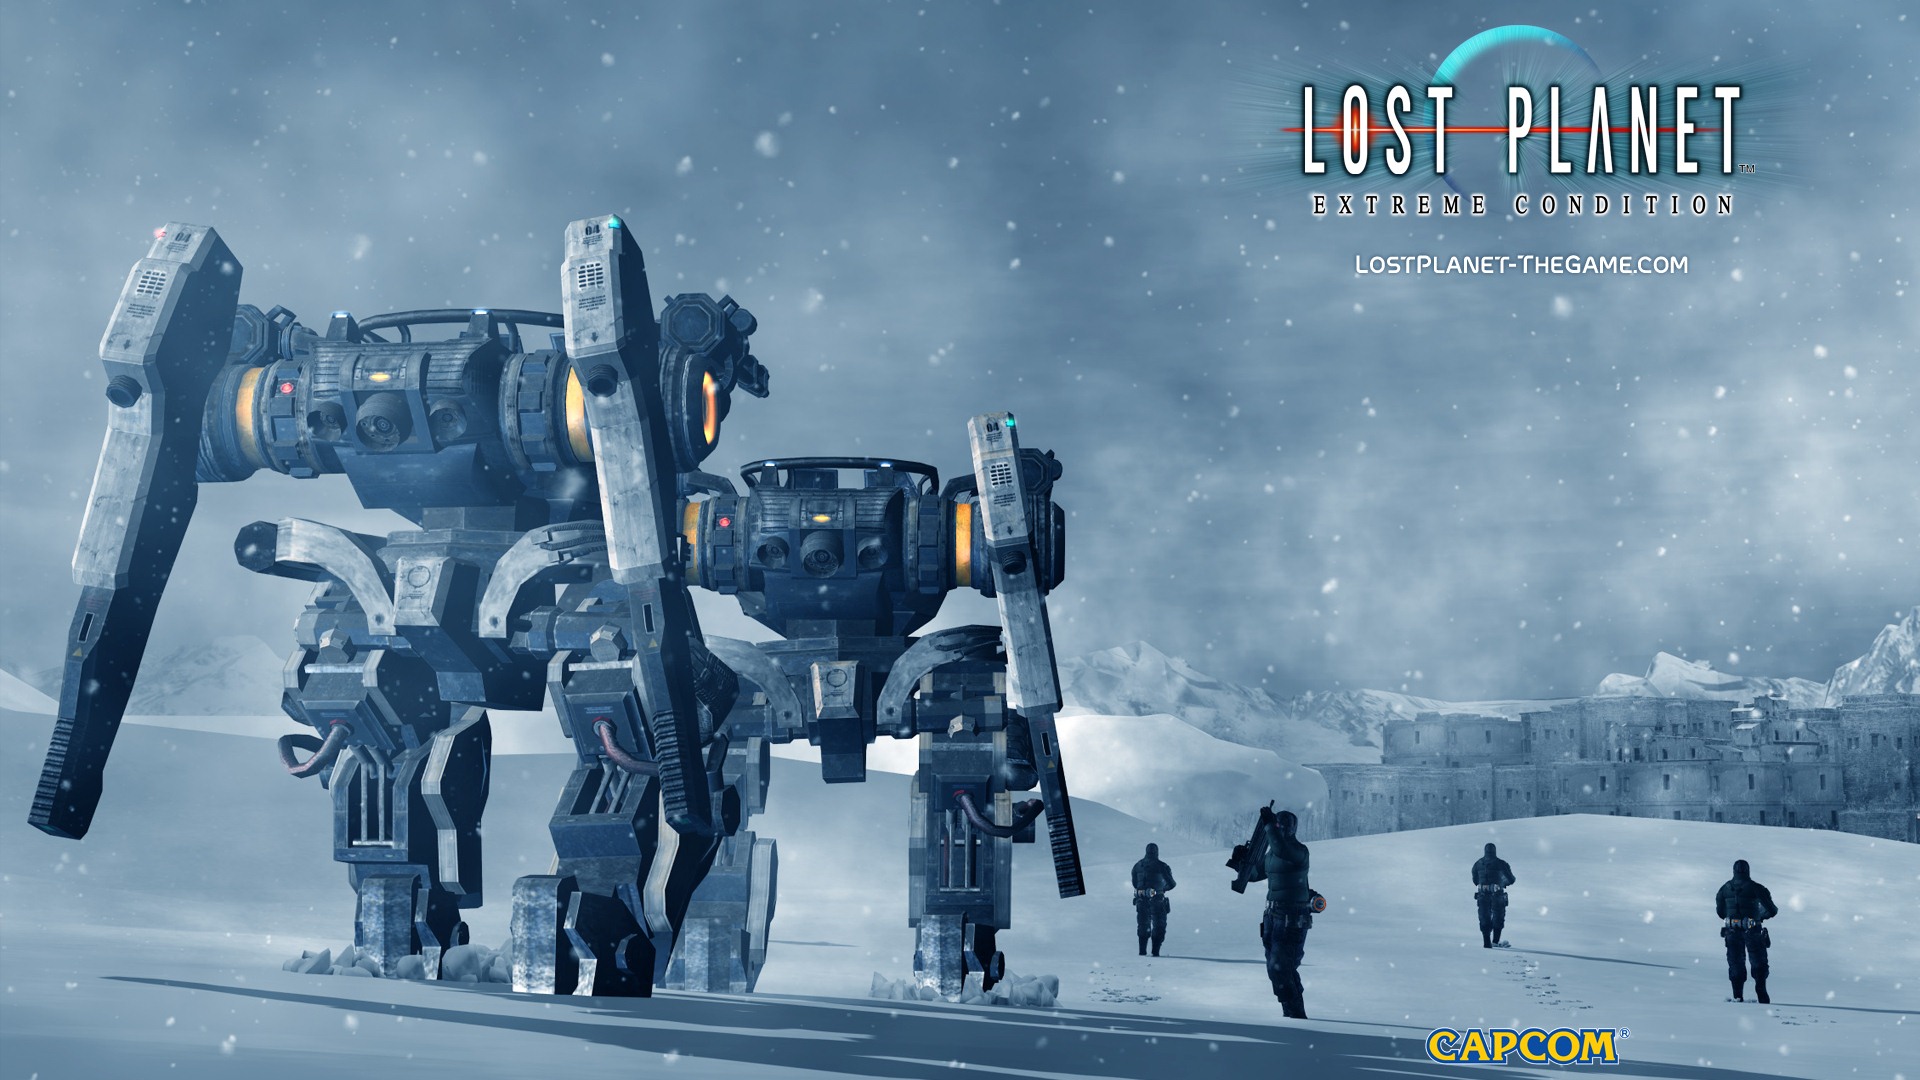 Lost Planet: Extreme Condition HD tapety na plochu #1 - 1920x1080